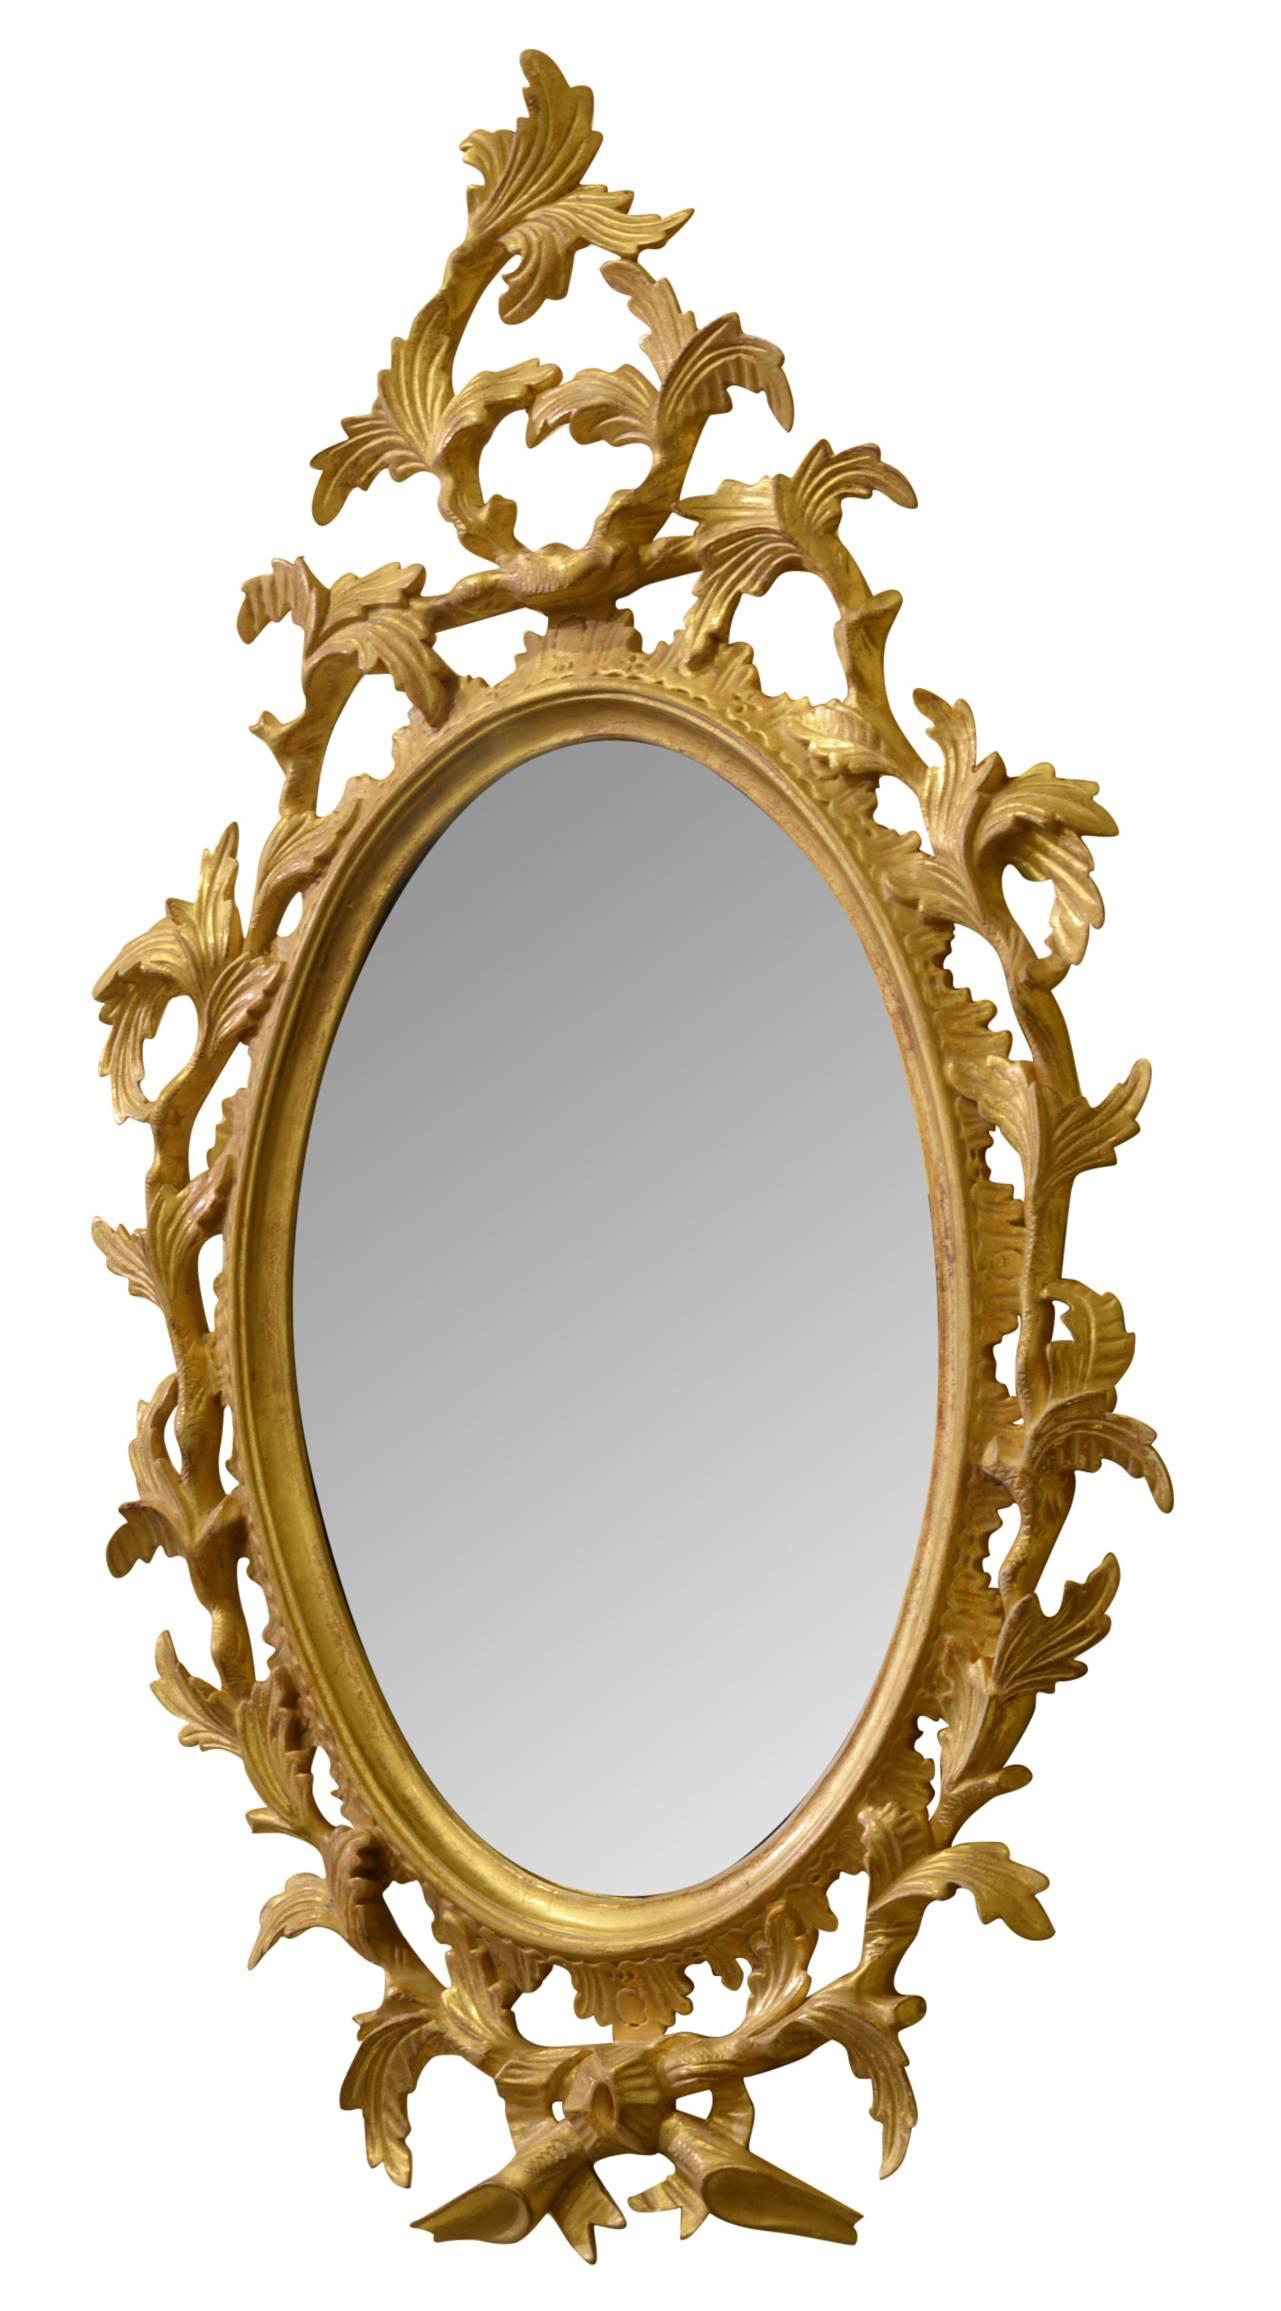 Antique George III style Rococo carved giltwood small mirror,

circa 1900.